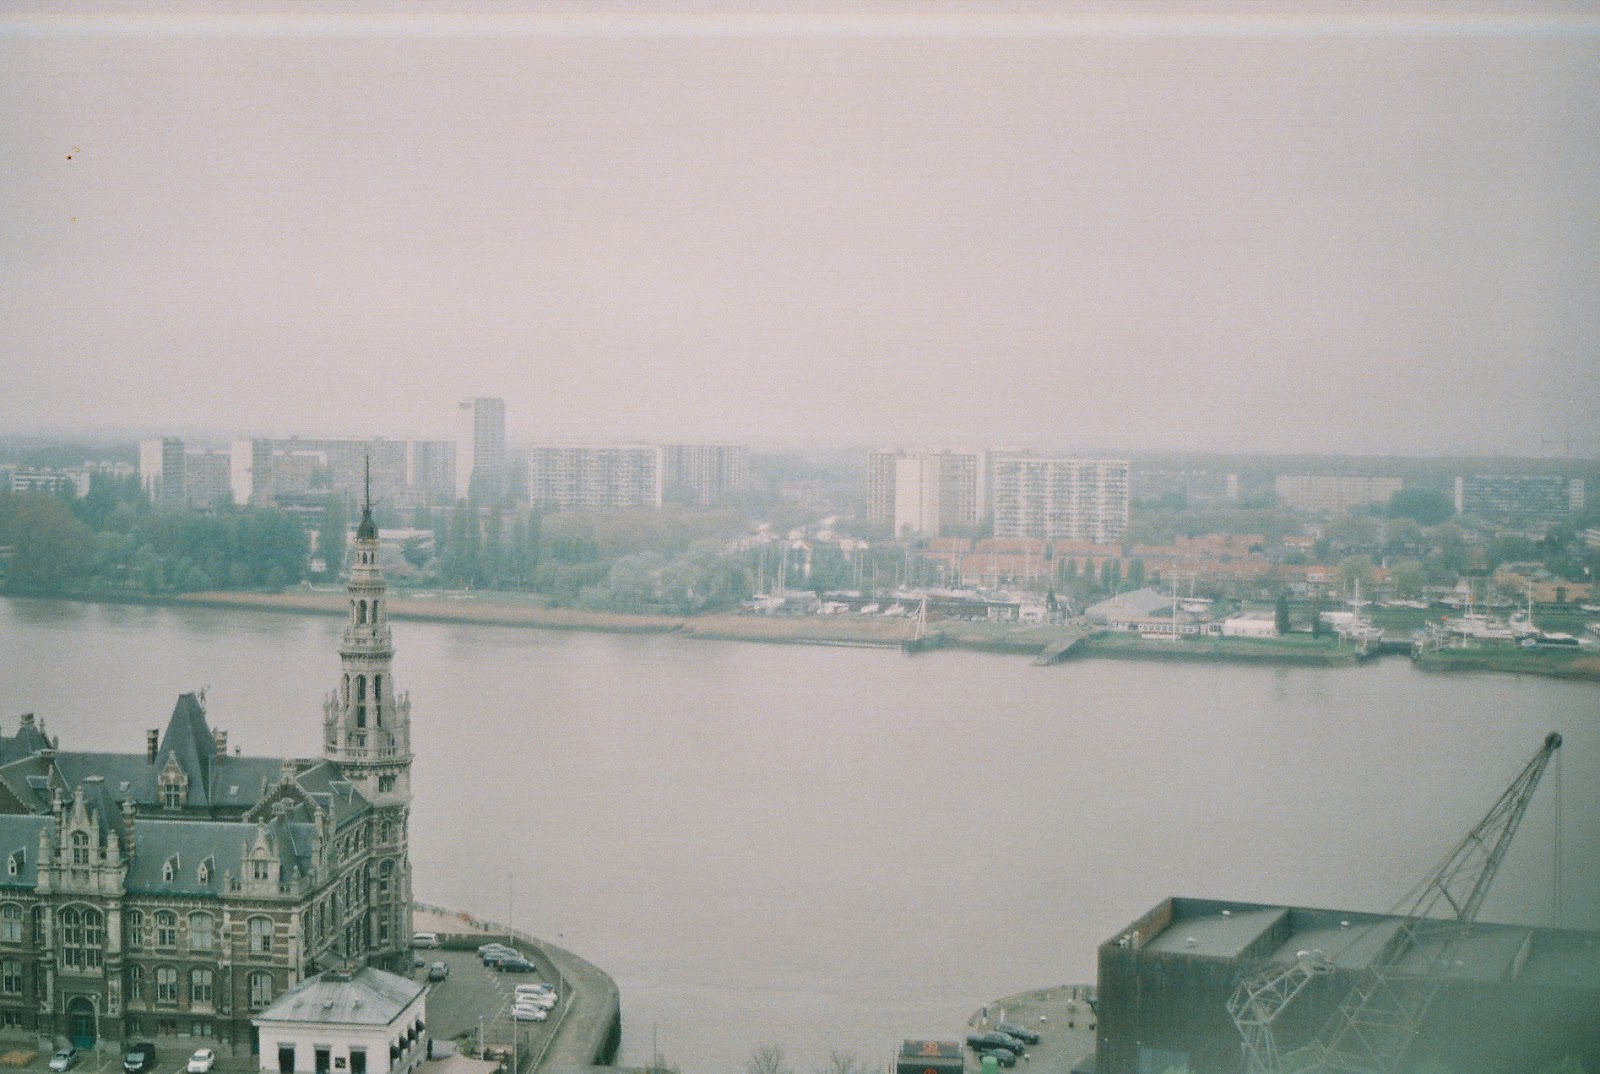 Antwerp Film Travel Guide - What To See? | oandrajos.blogspot.co.uk